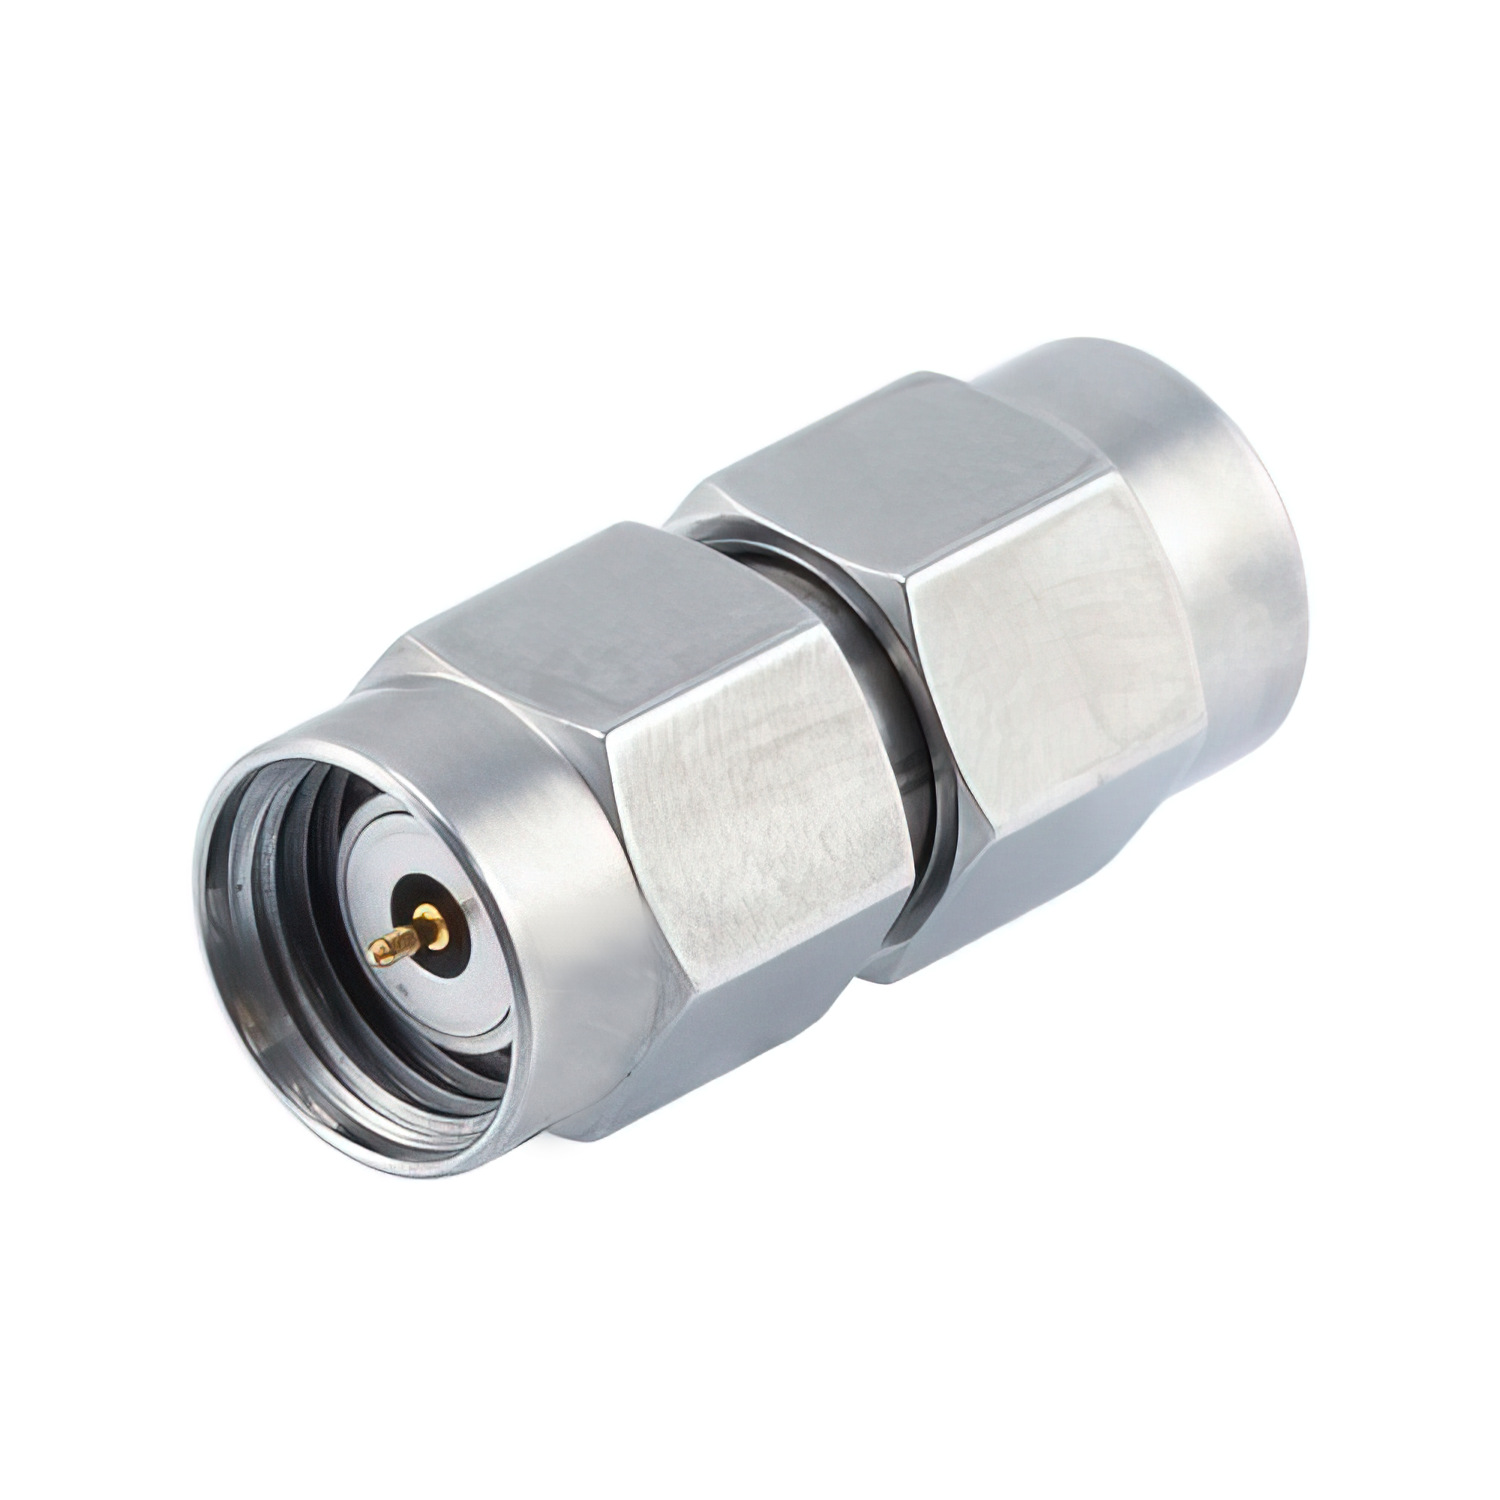 2.4mm male to 1.85mm male adapter2